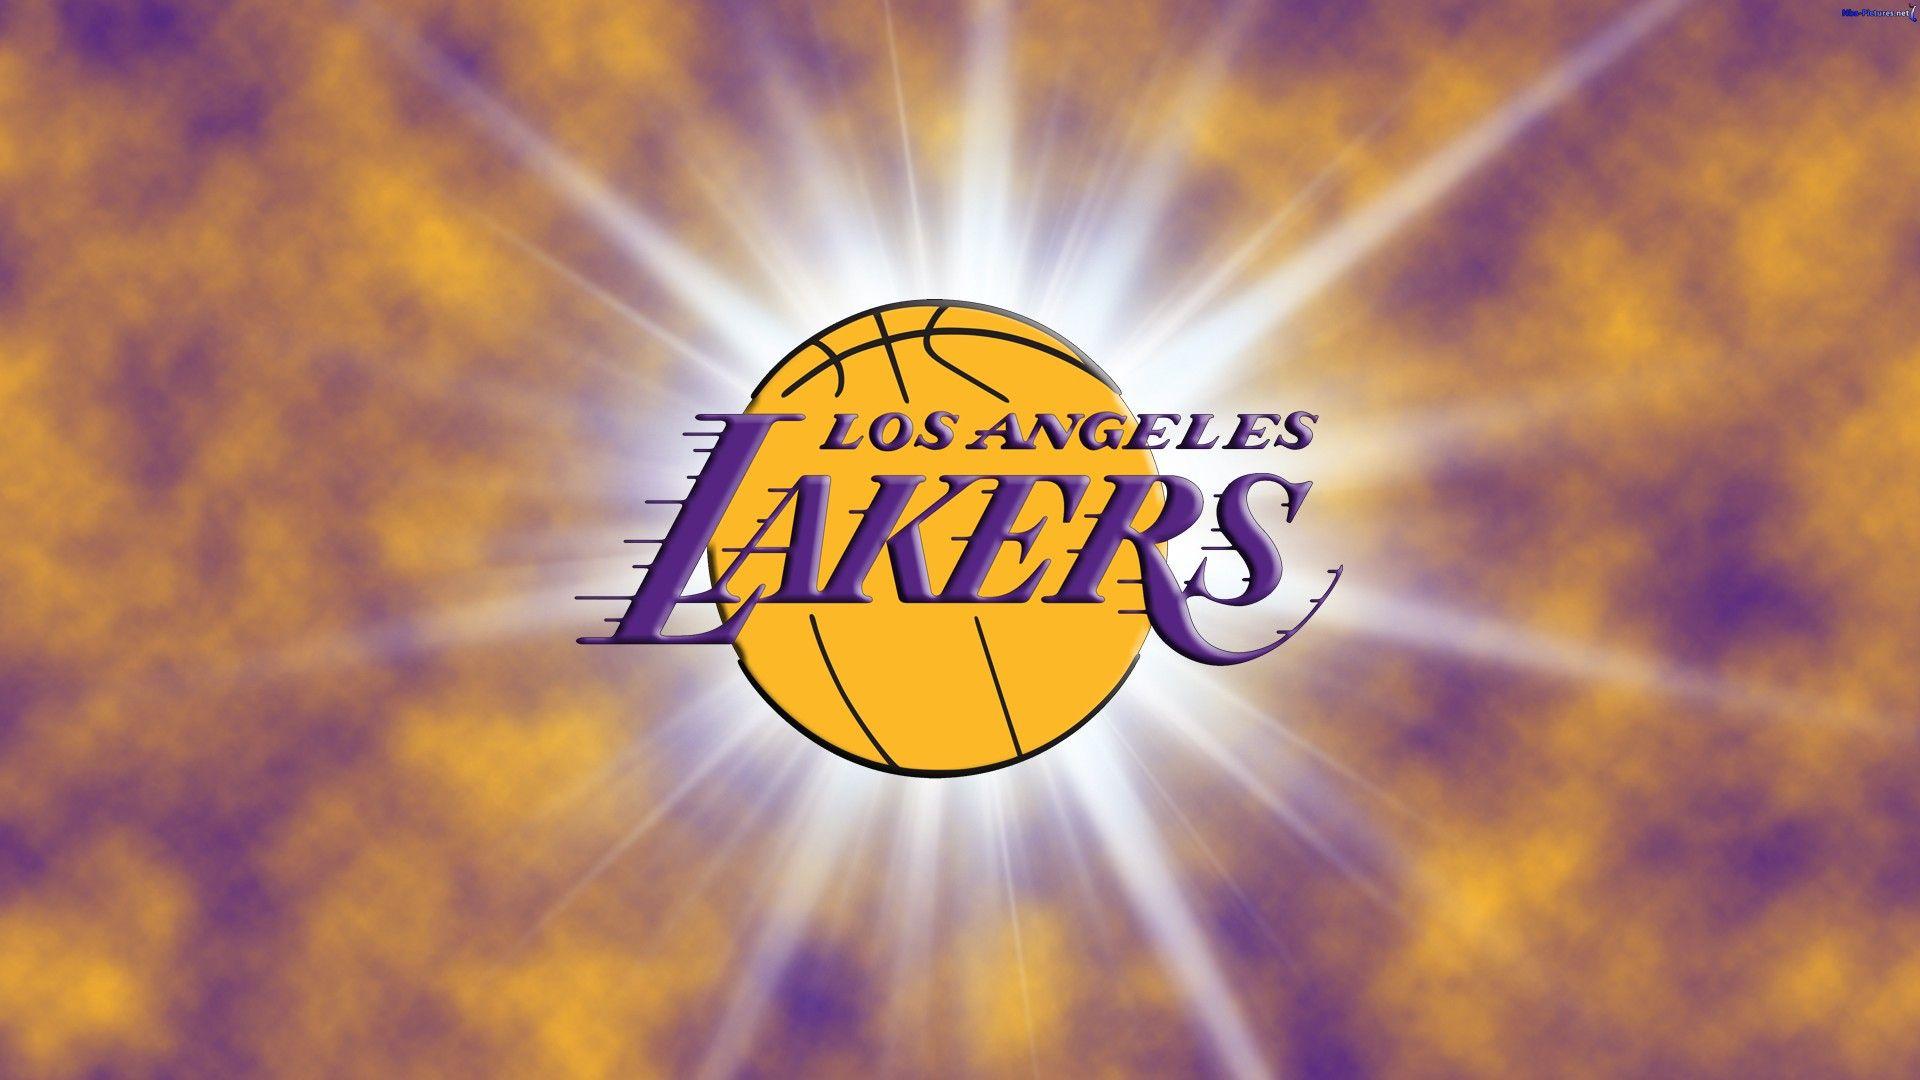 The Los Angeles Lakers background collection